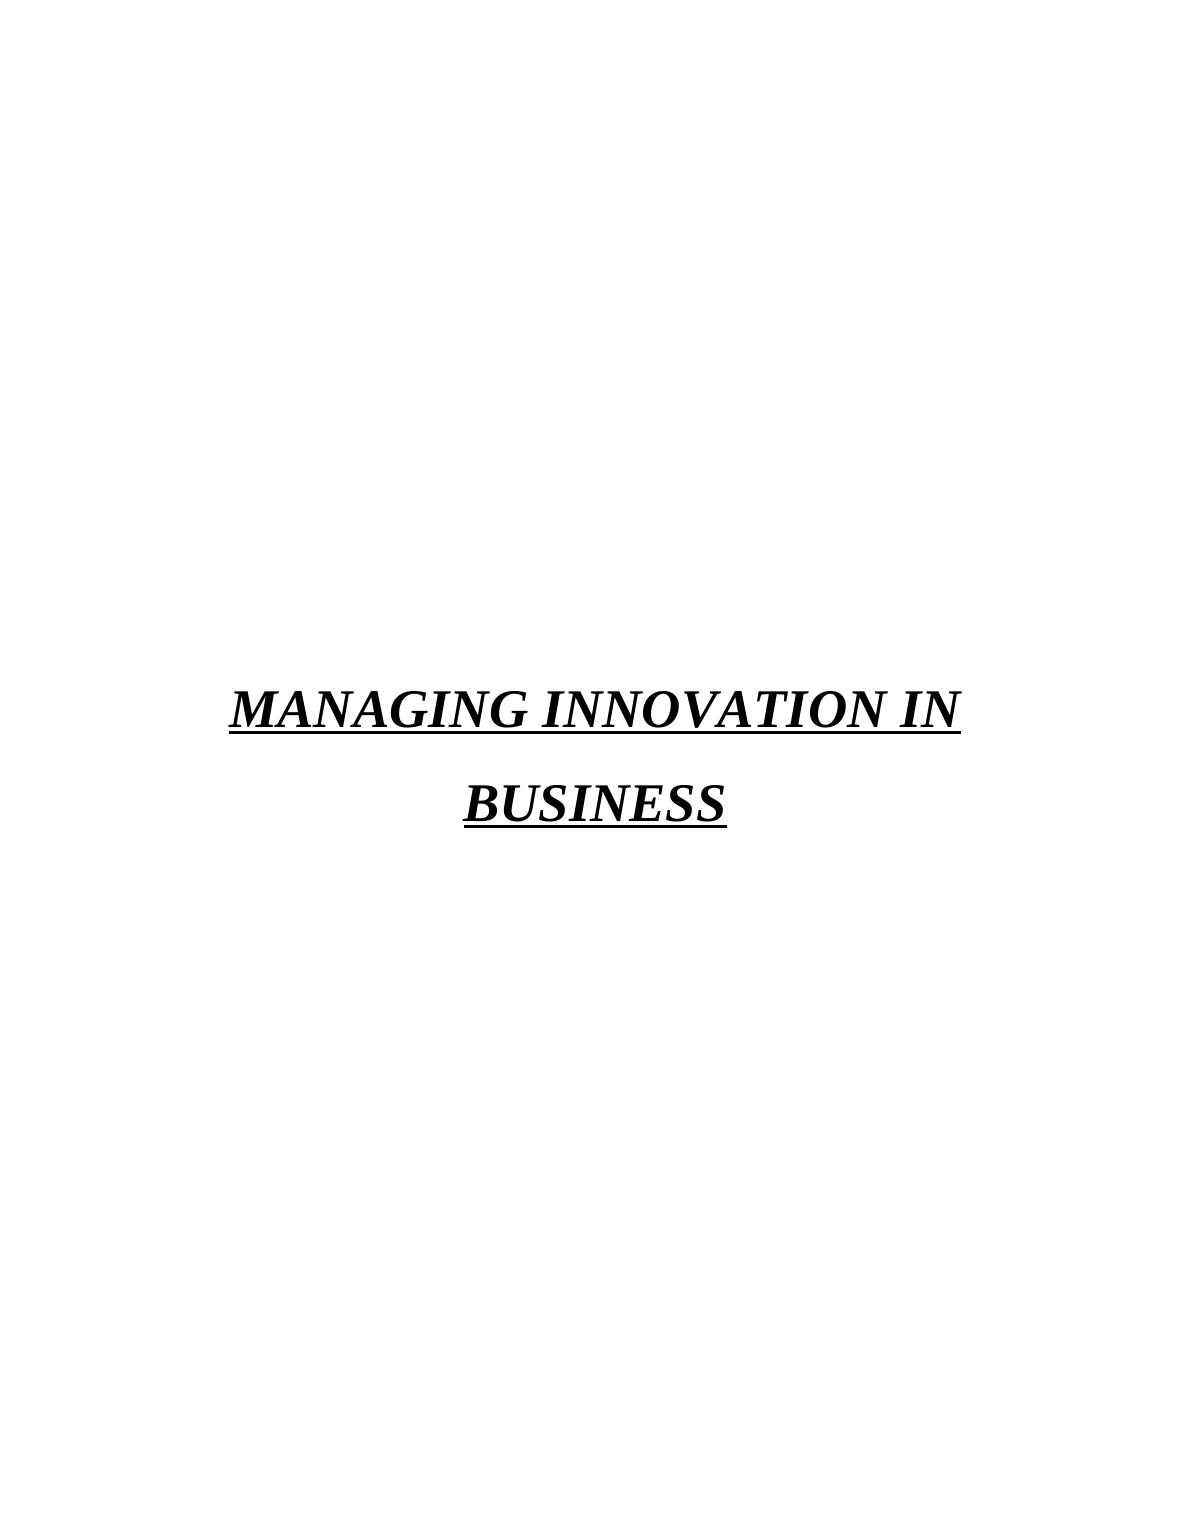 PDF: Managing Innovation in Business_1